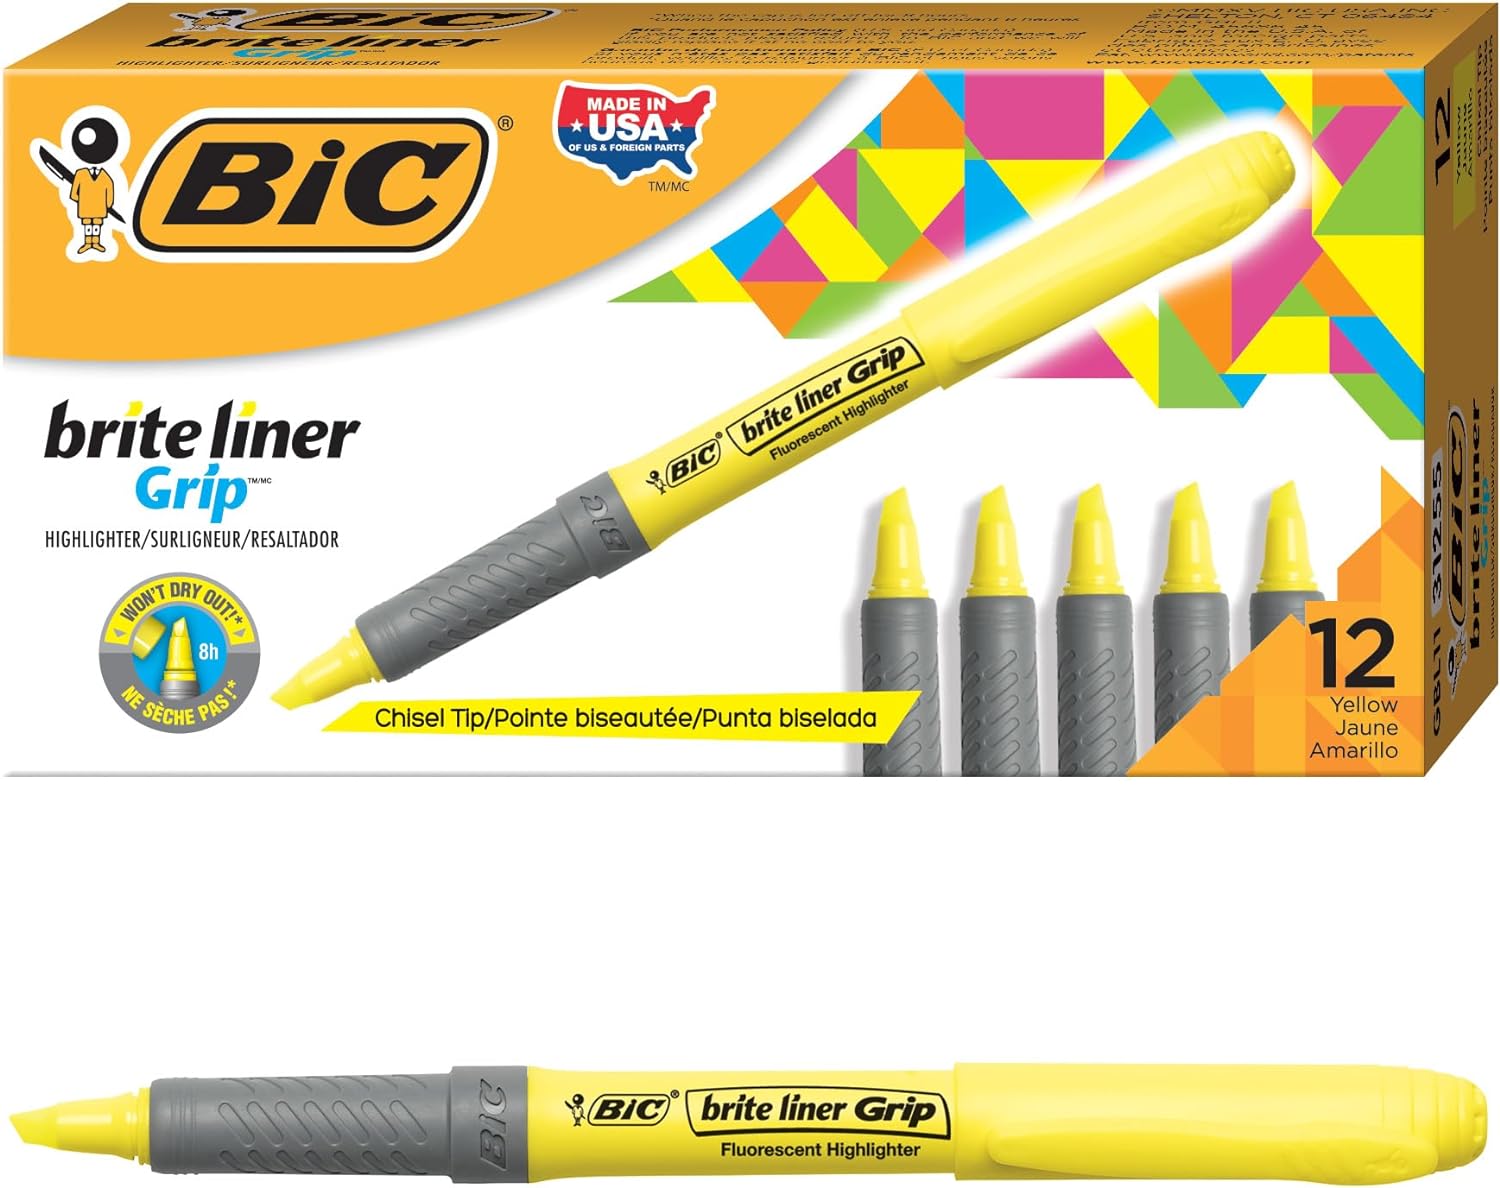 As a student, I swear by three essentials: Moleskine' Cahier Journals, Pentel R.S.V.P. pens, and these BIC Brite Liner highlighters.My brother (prior to graduating) needed highlighters during finals week and his school store only had these in stock, but the multi-colored option. Since he has never liked using any highlighter color other than yellow, he gave the rest to me. The colored ones were surprisingly great - not too ink, not too dark, not too obnoxious.I went through all 4 that he gave m